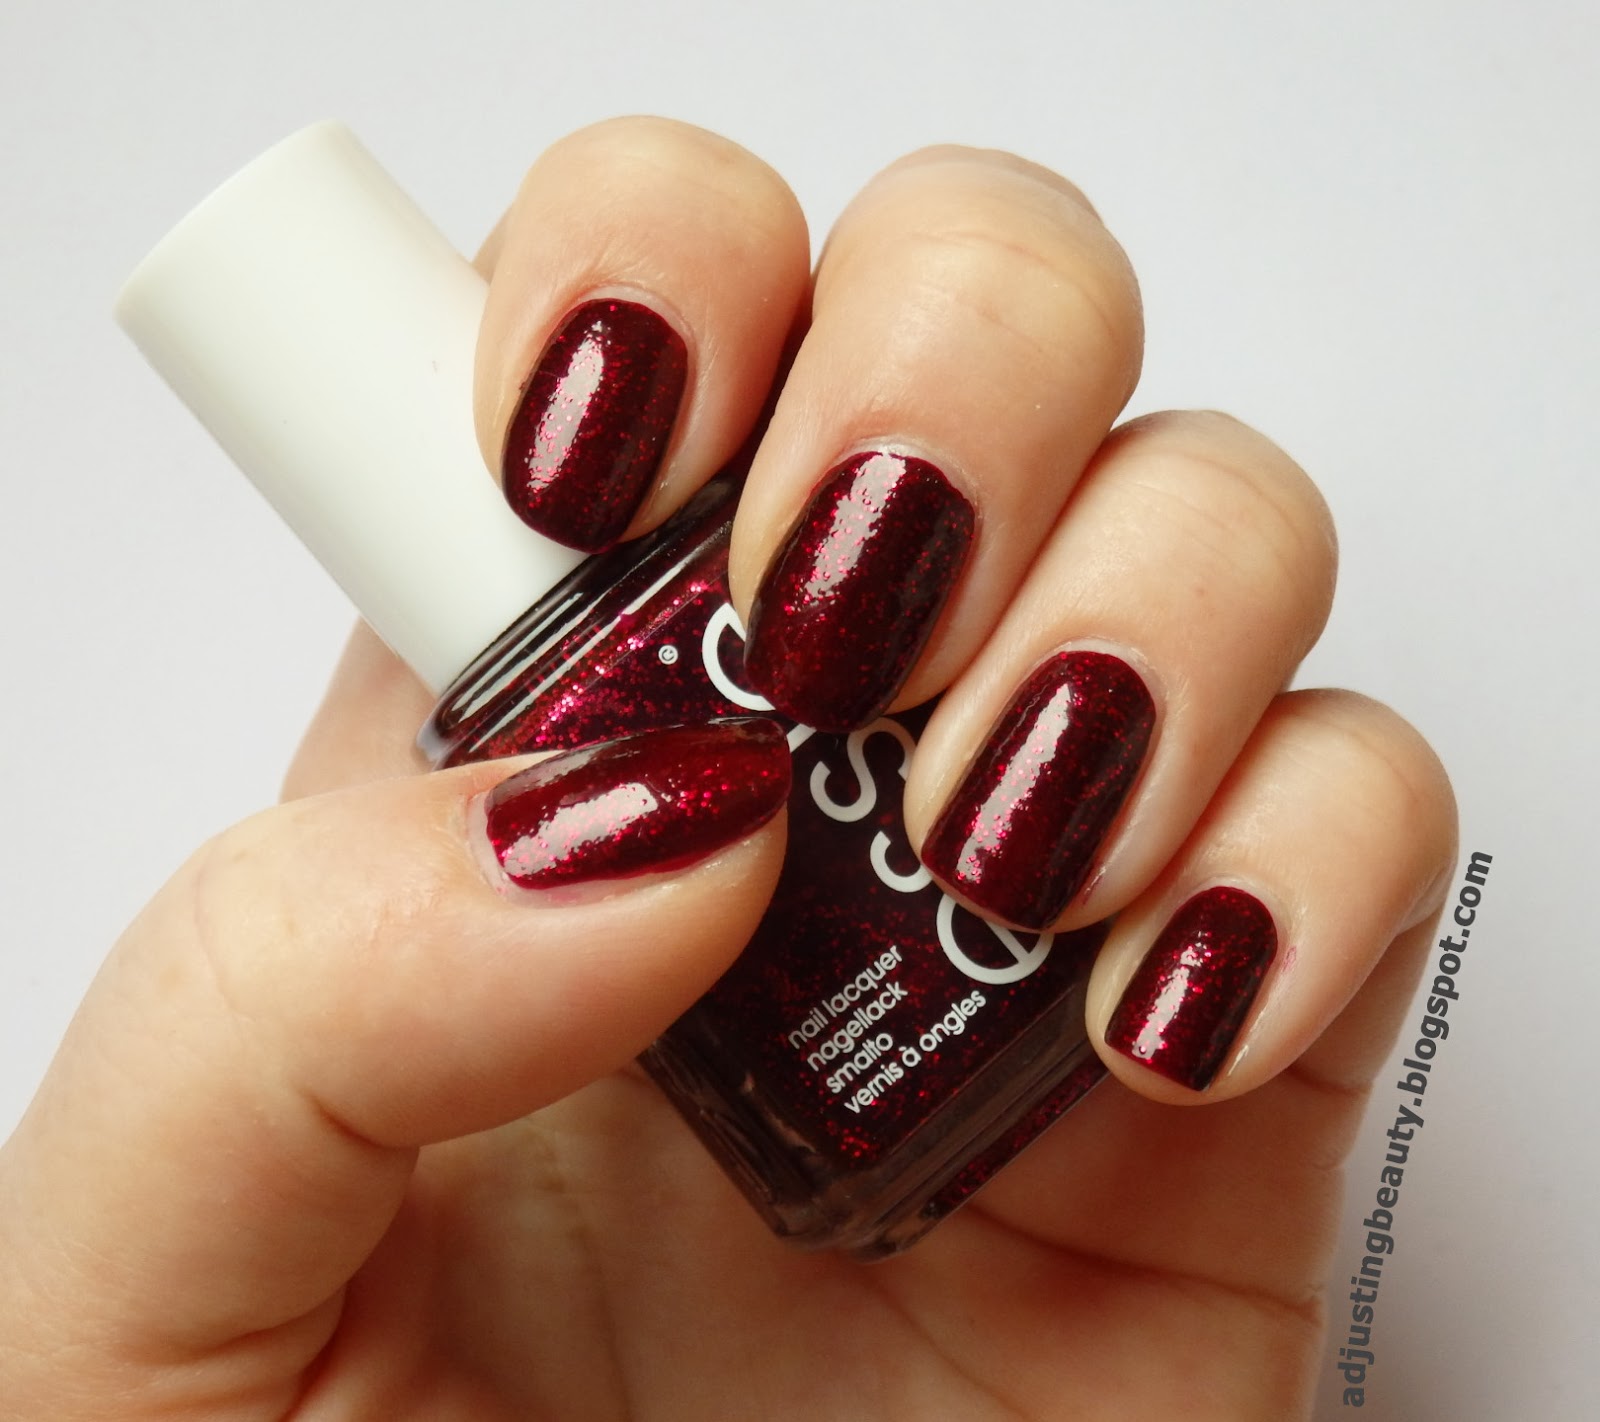 Review Essie Toggle To The Top Adjusting Beauty